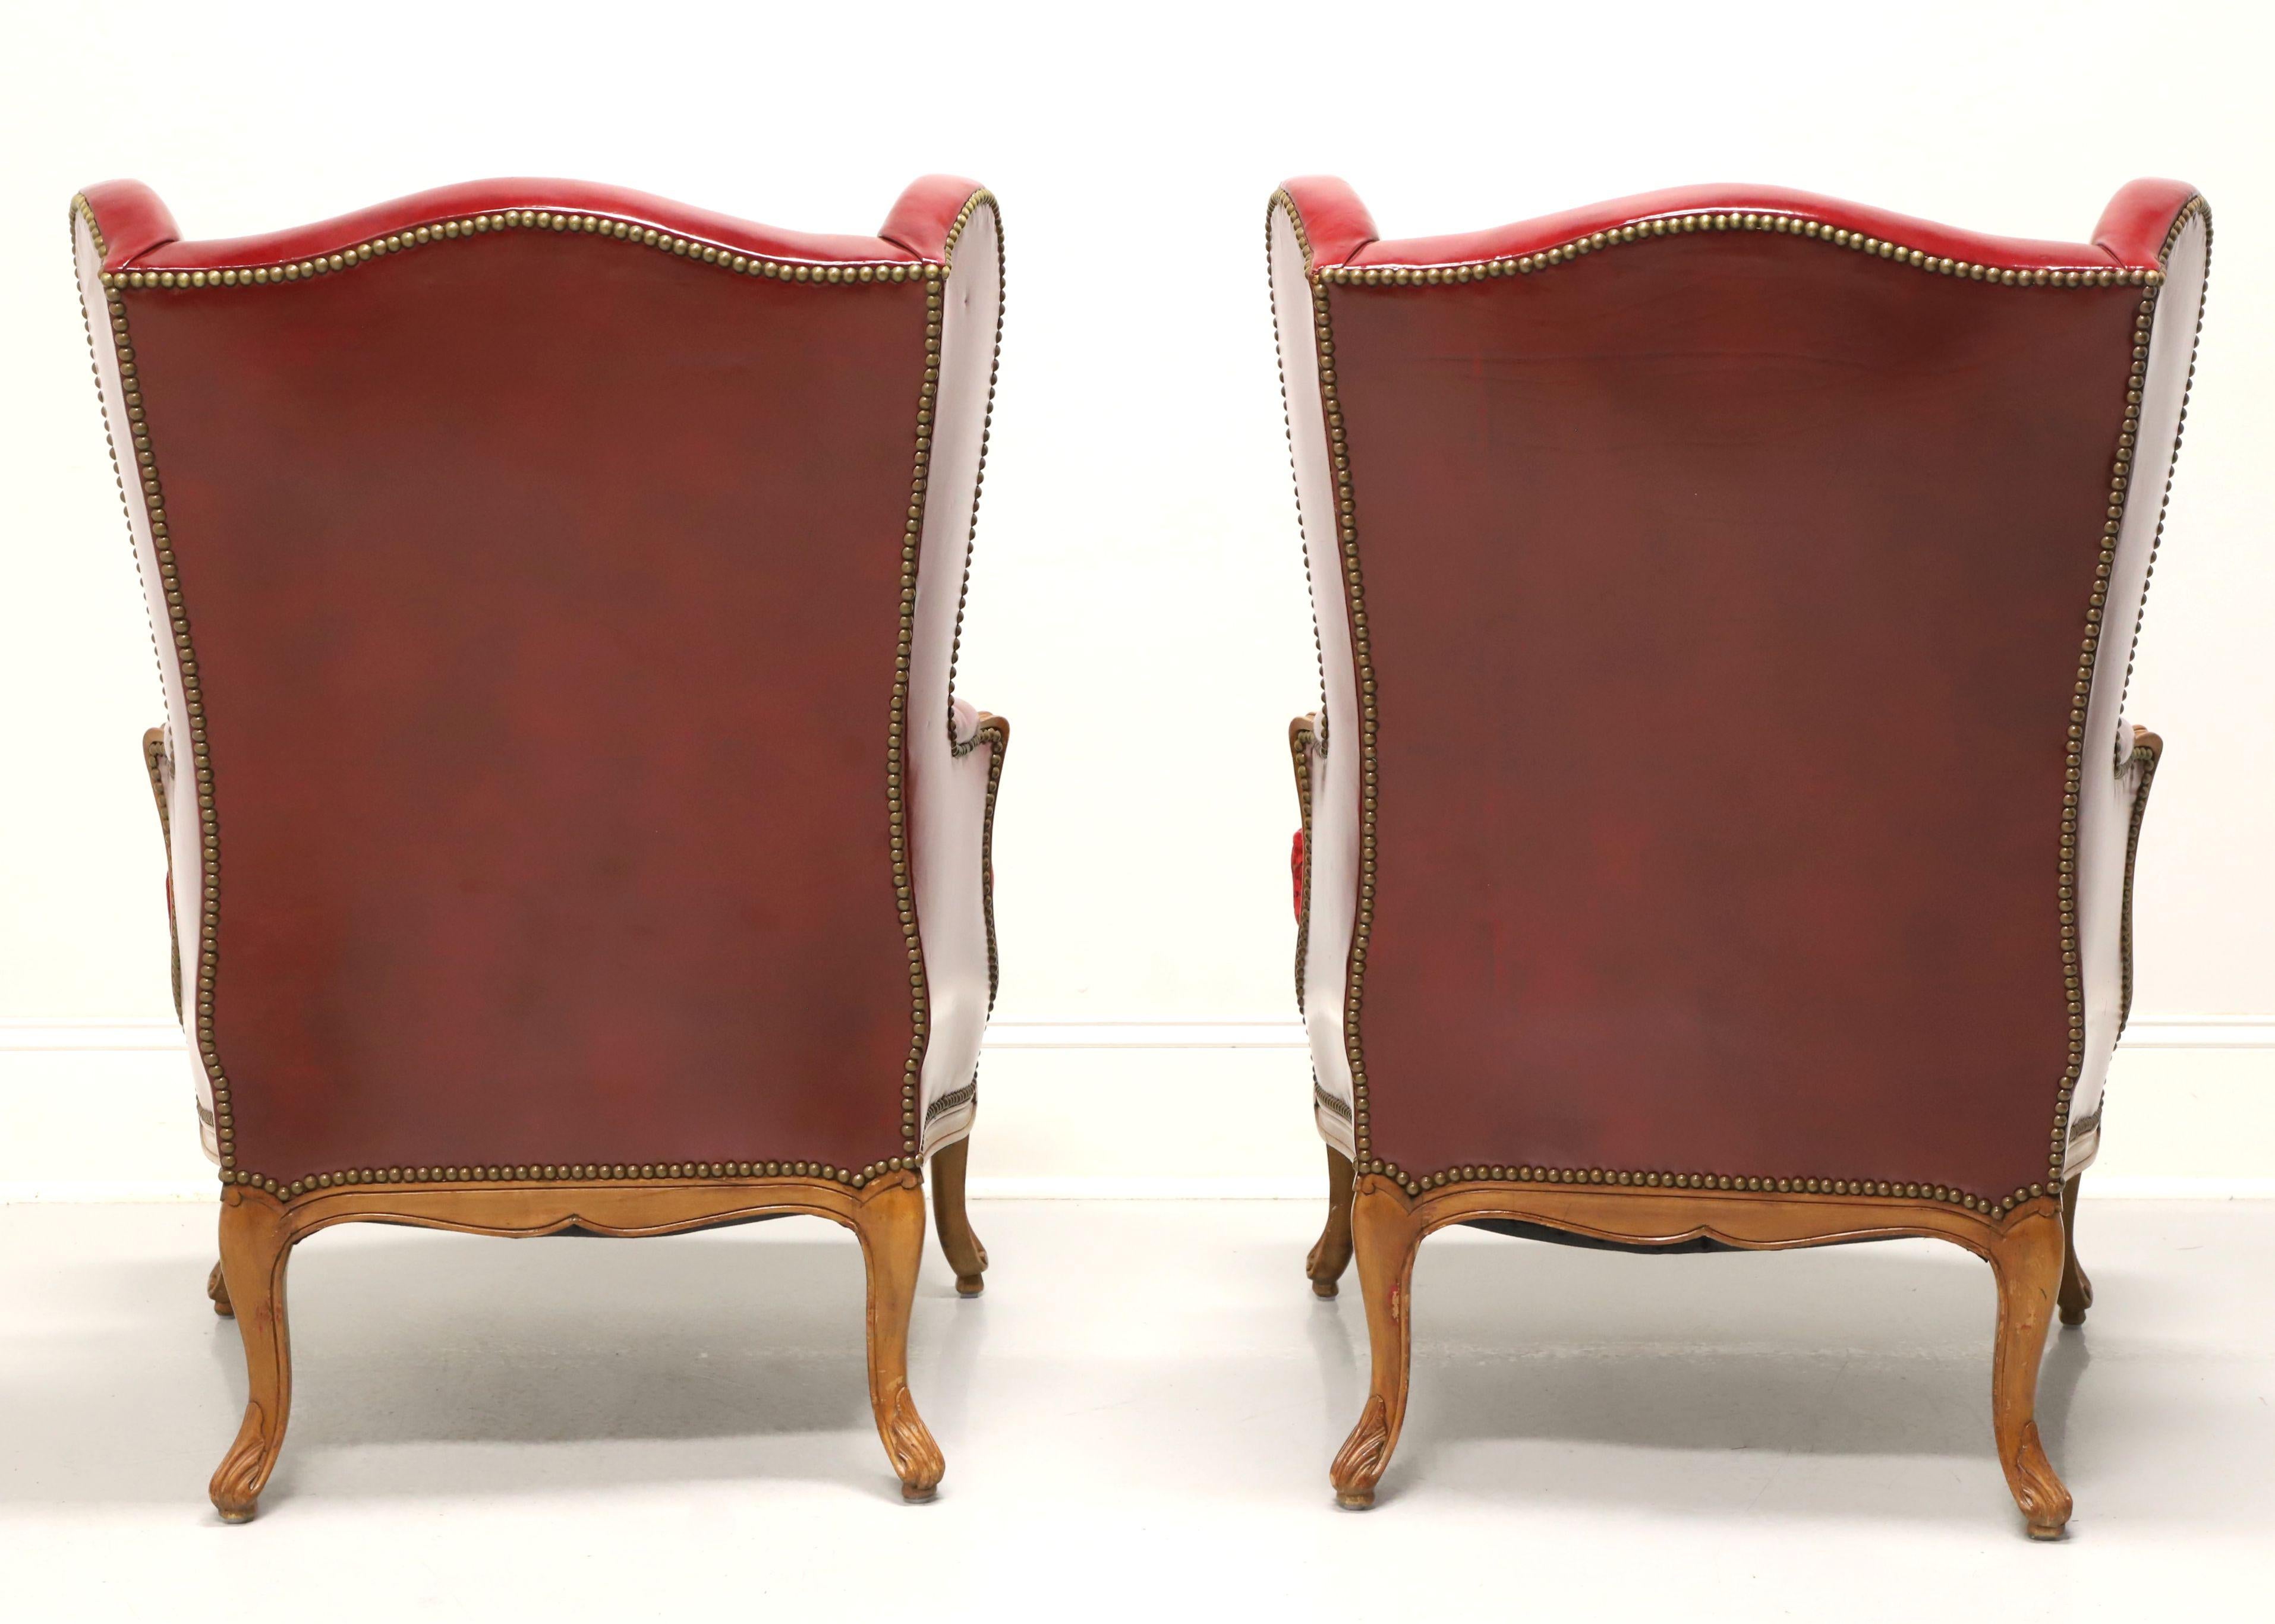 Fabric Late 19th Century French Provincial Louis XV Red Leather Wing Back Chairs - Pair